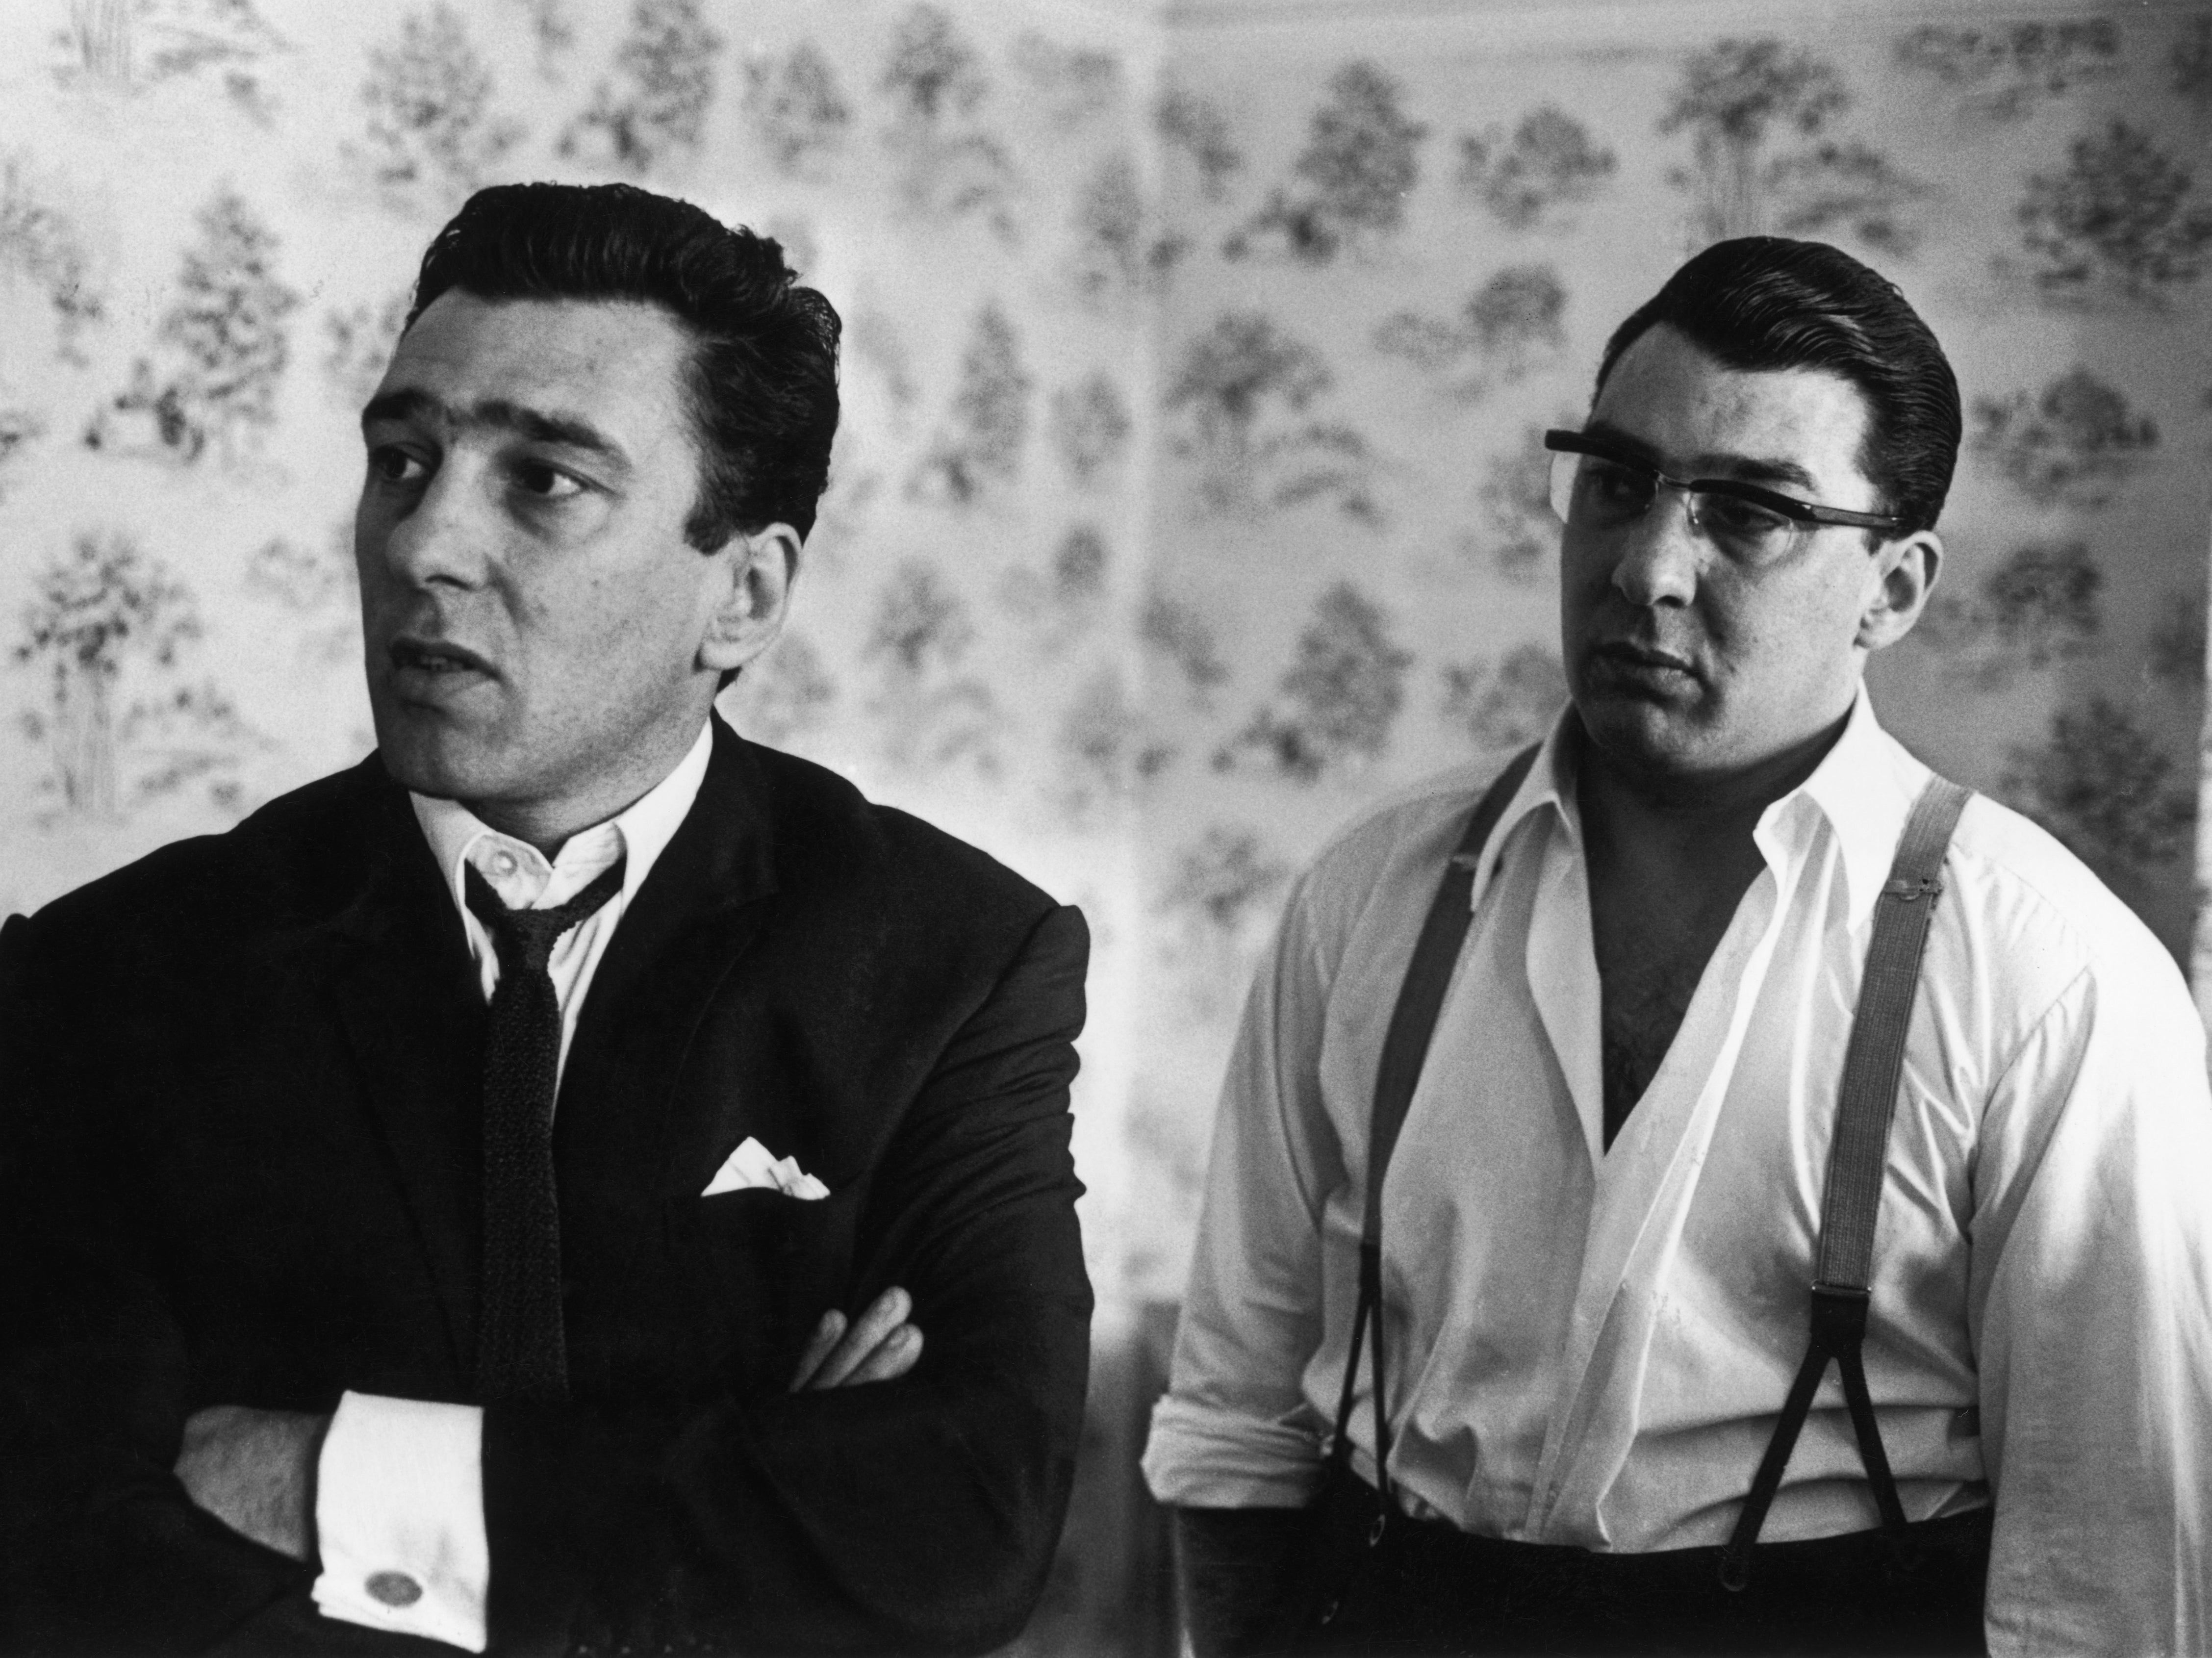 Reggie (left) and Ronnie Kray